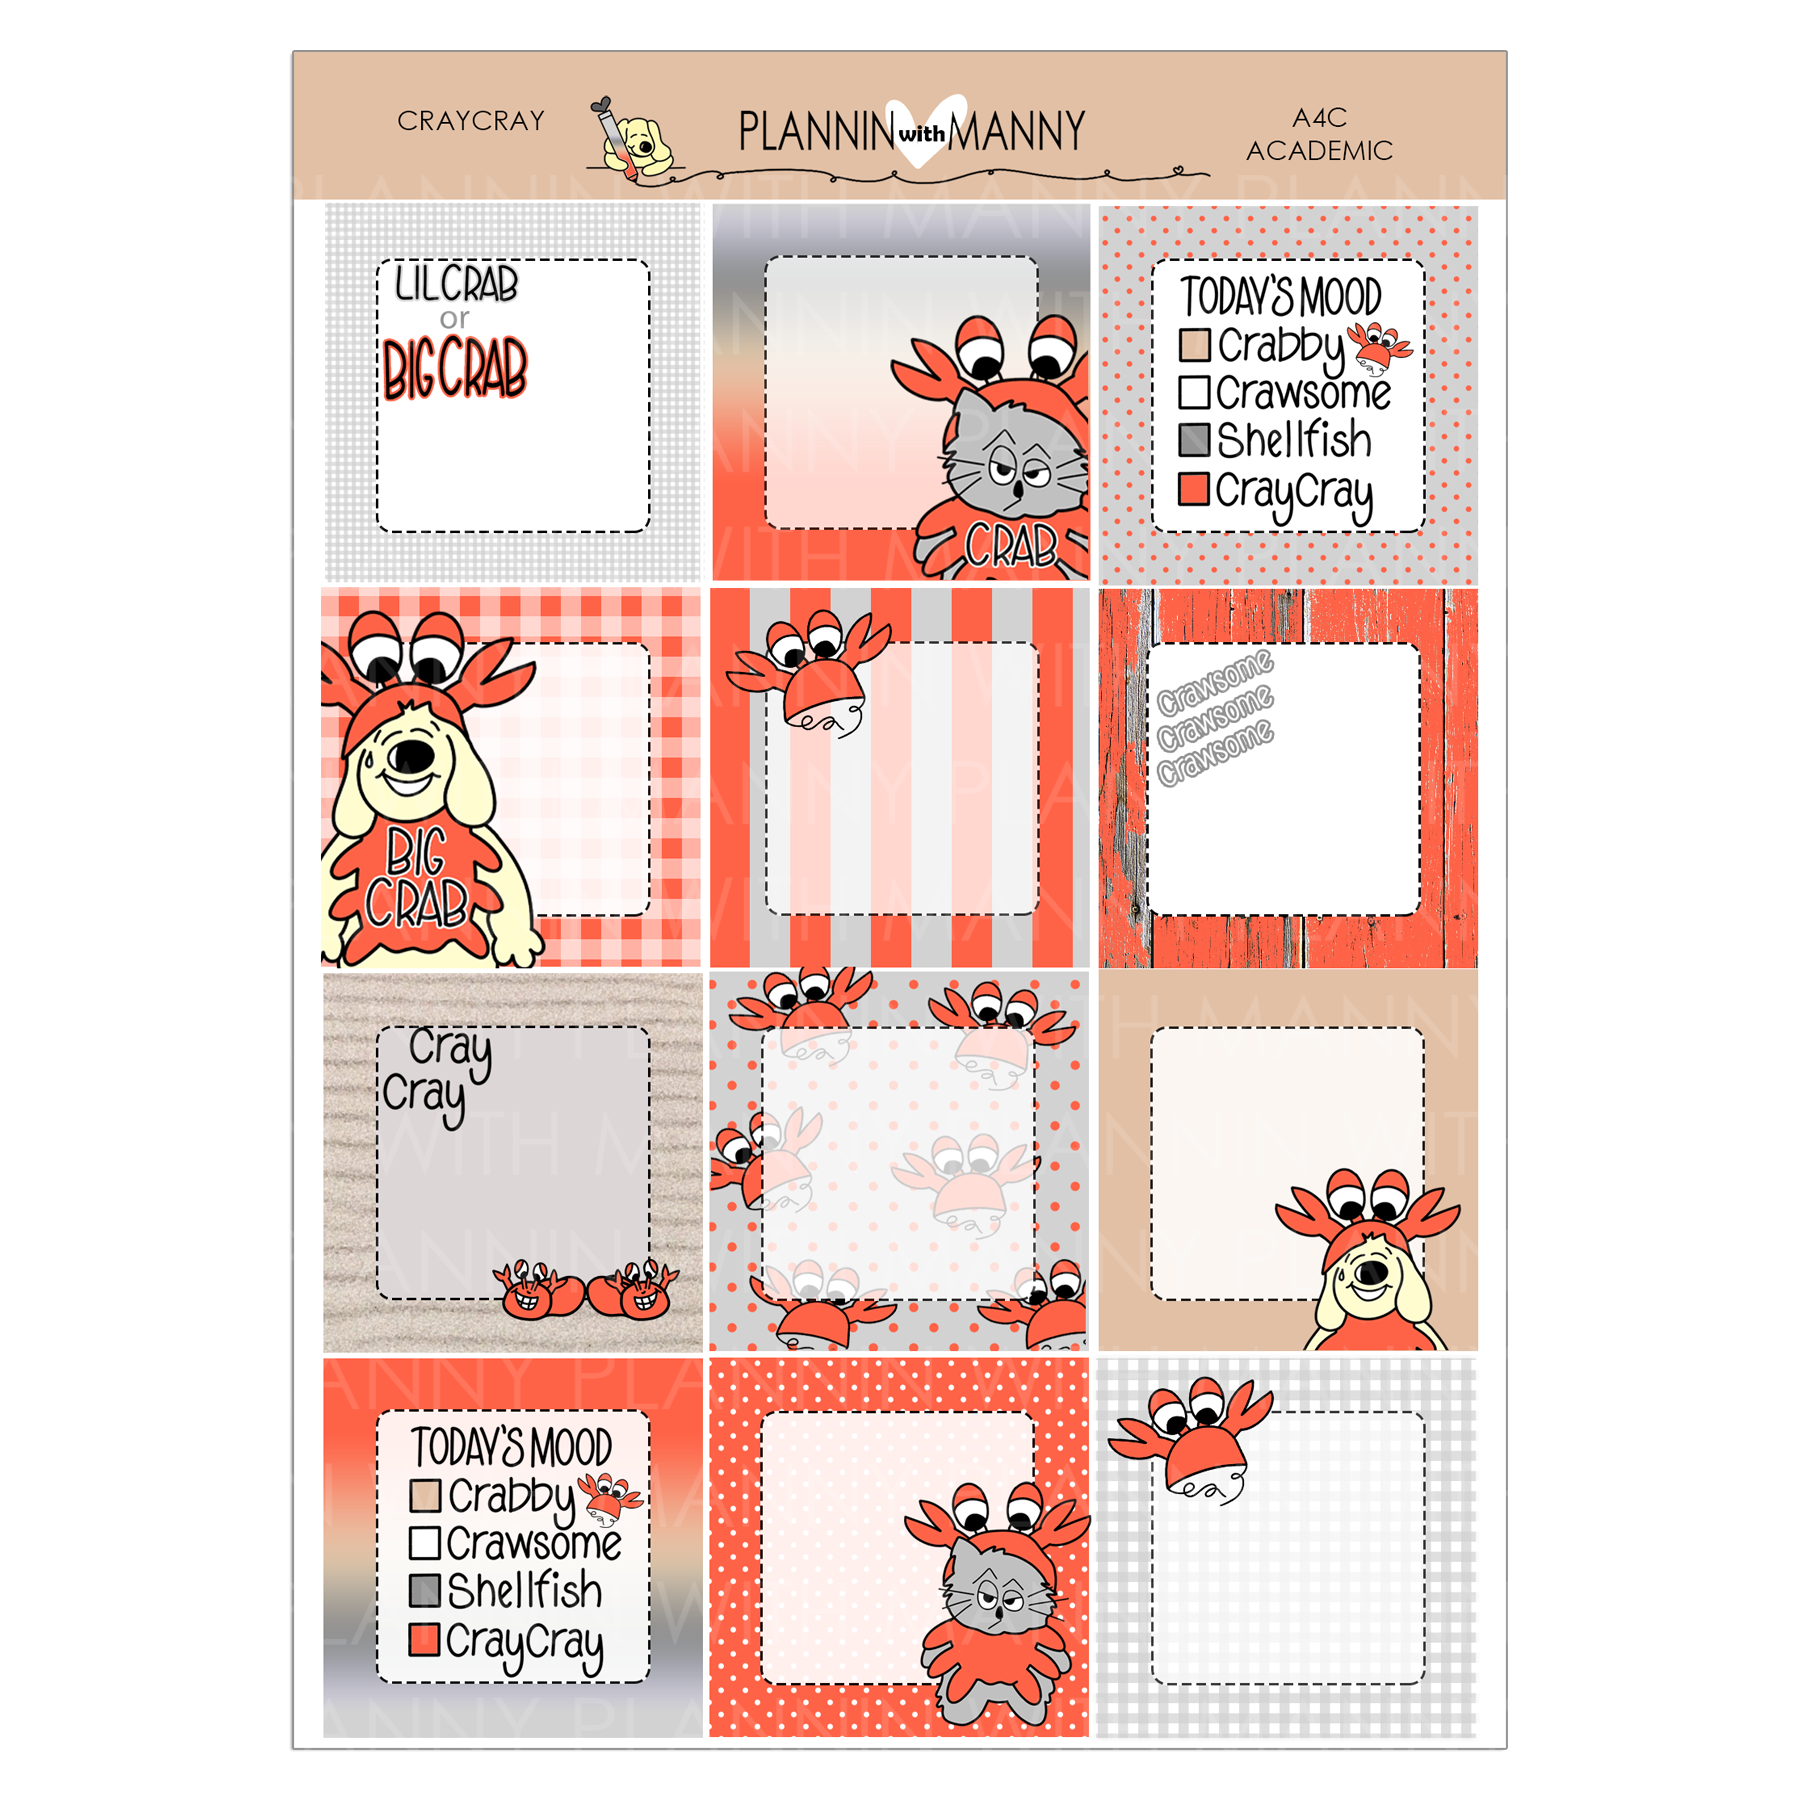 A116C Cray Cray 1.5" Square Planner Stickers